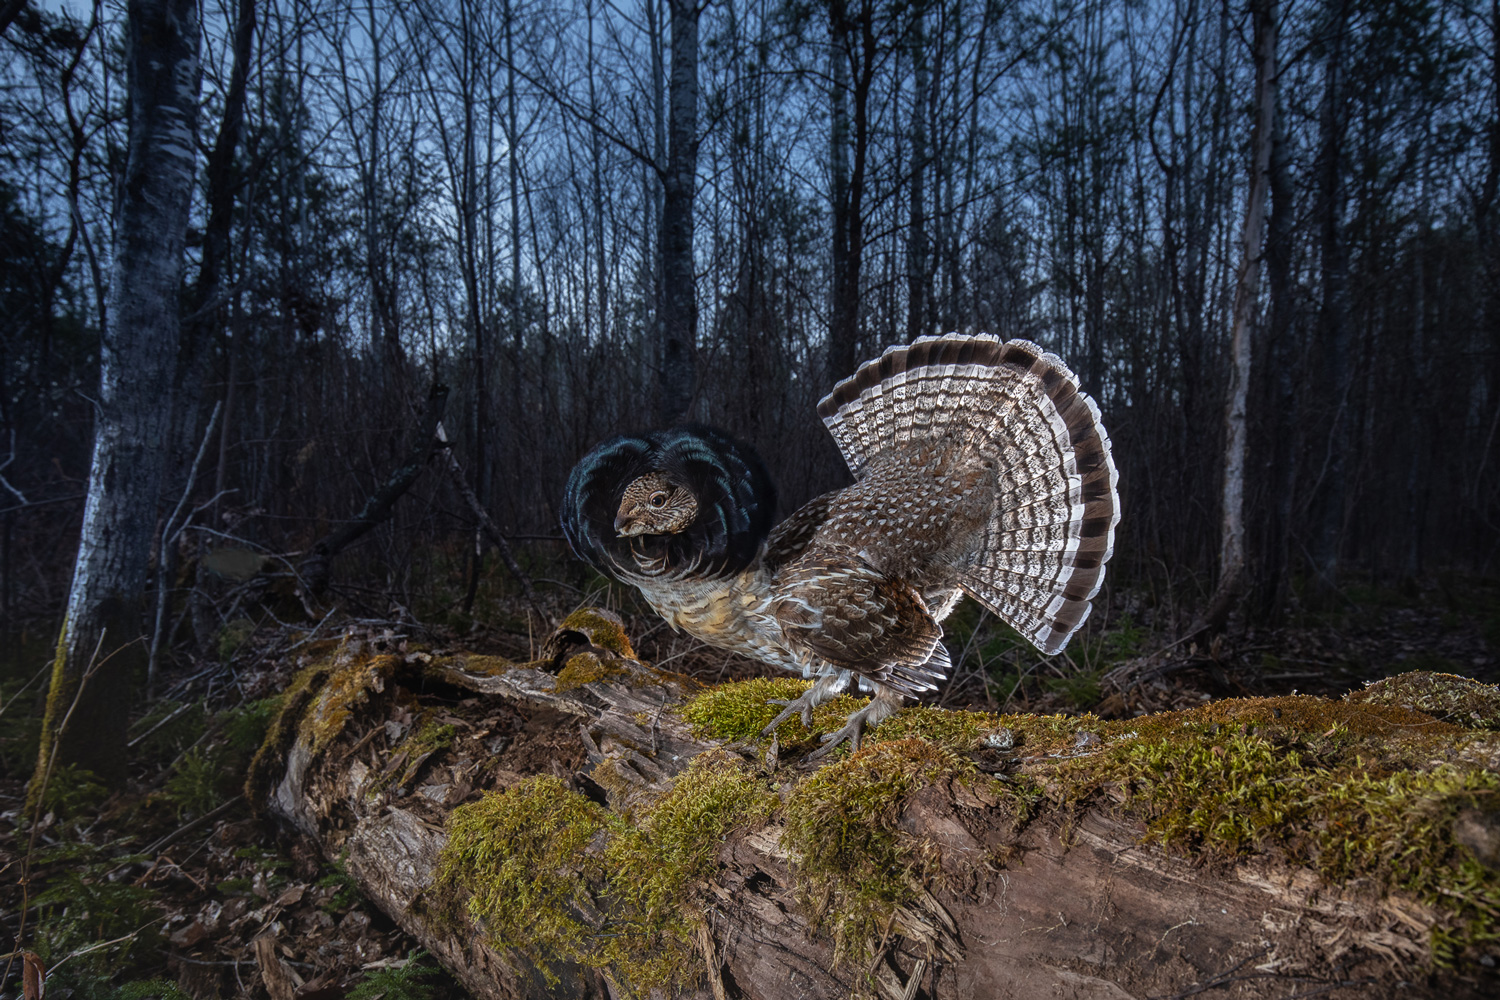 Ben Olson captures image of Grouse with Scout